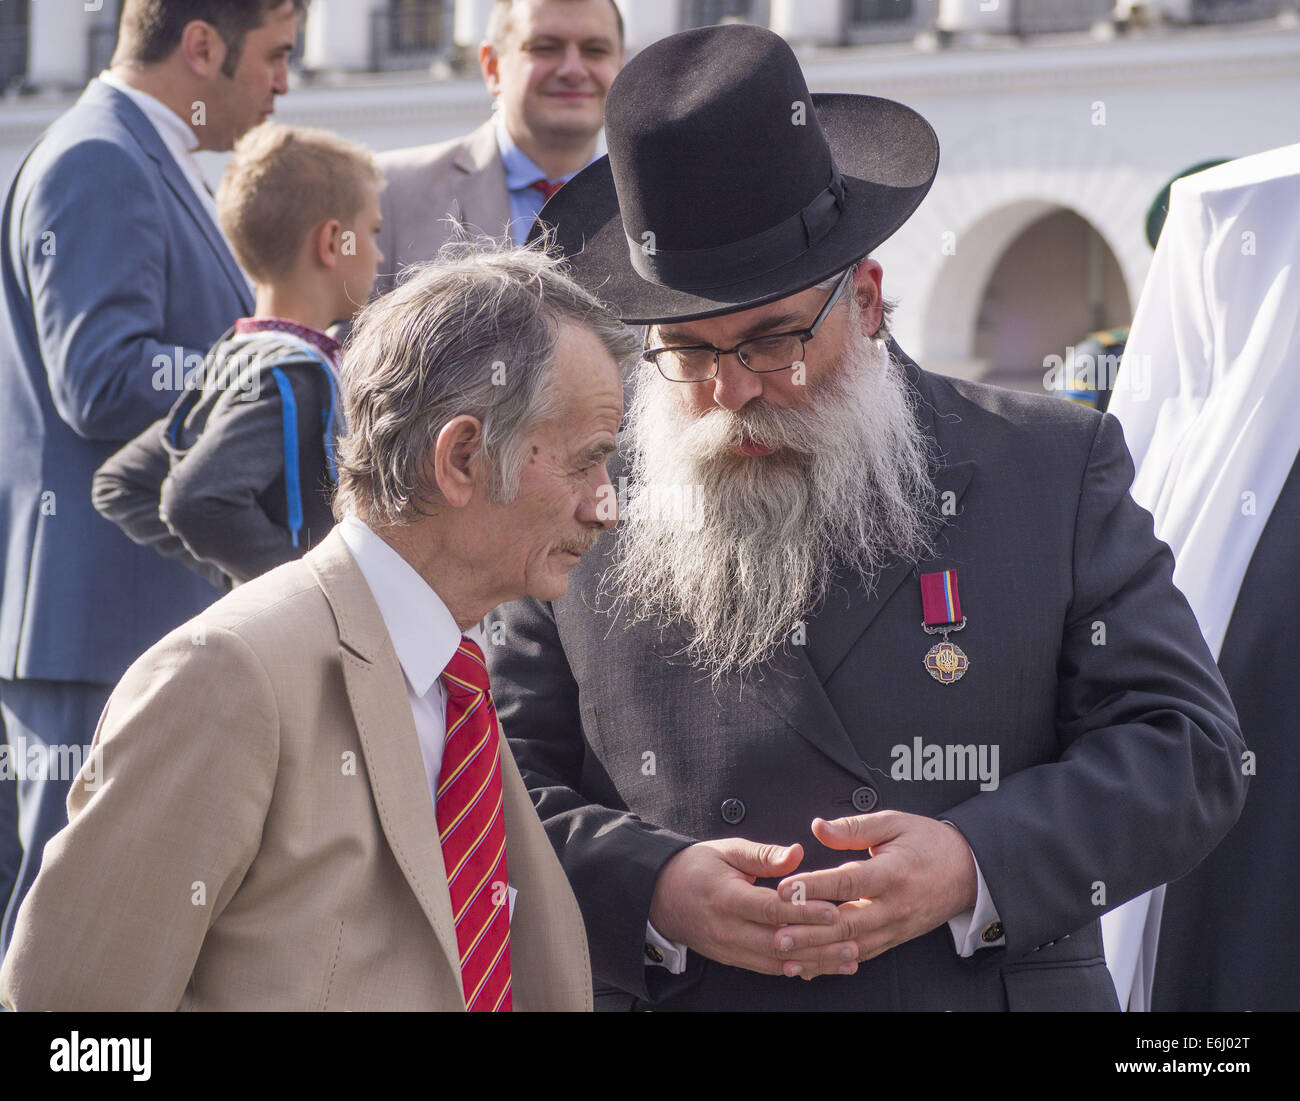 Kiev, Ukraine. 24th Aug, 2014. The leader of the Crimean Tatar people Mustafa Cemil talks with Chief Rabbi of Kiev and Ukraine Yaakov Dov Bleich -- In Kiev, the first time in five years, was the official military parade. The sixth in the history of independent Ukraine. In the parade was attended by members of the armed forces and was featured modern military equipment. Credit:  Igor Golovniov/ZUMA Wire/Alamy Live News Stock Photo